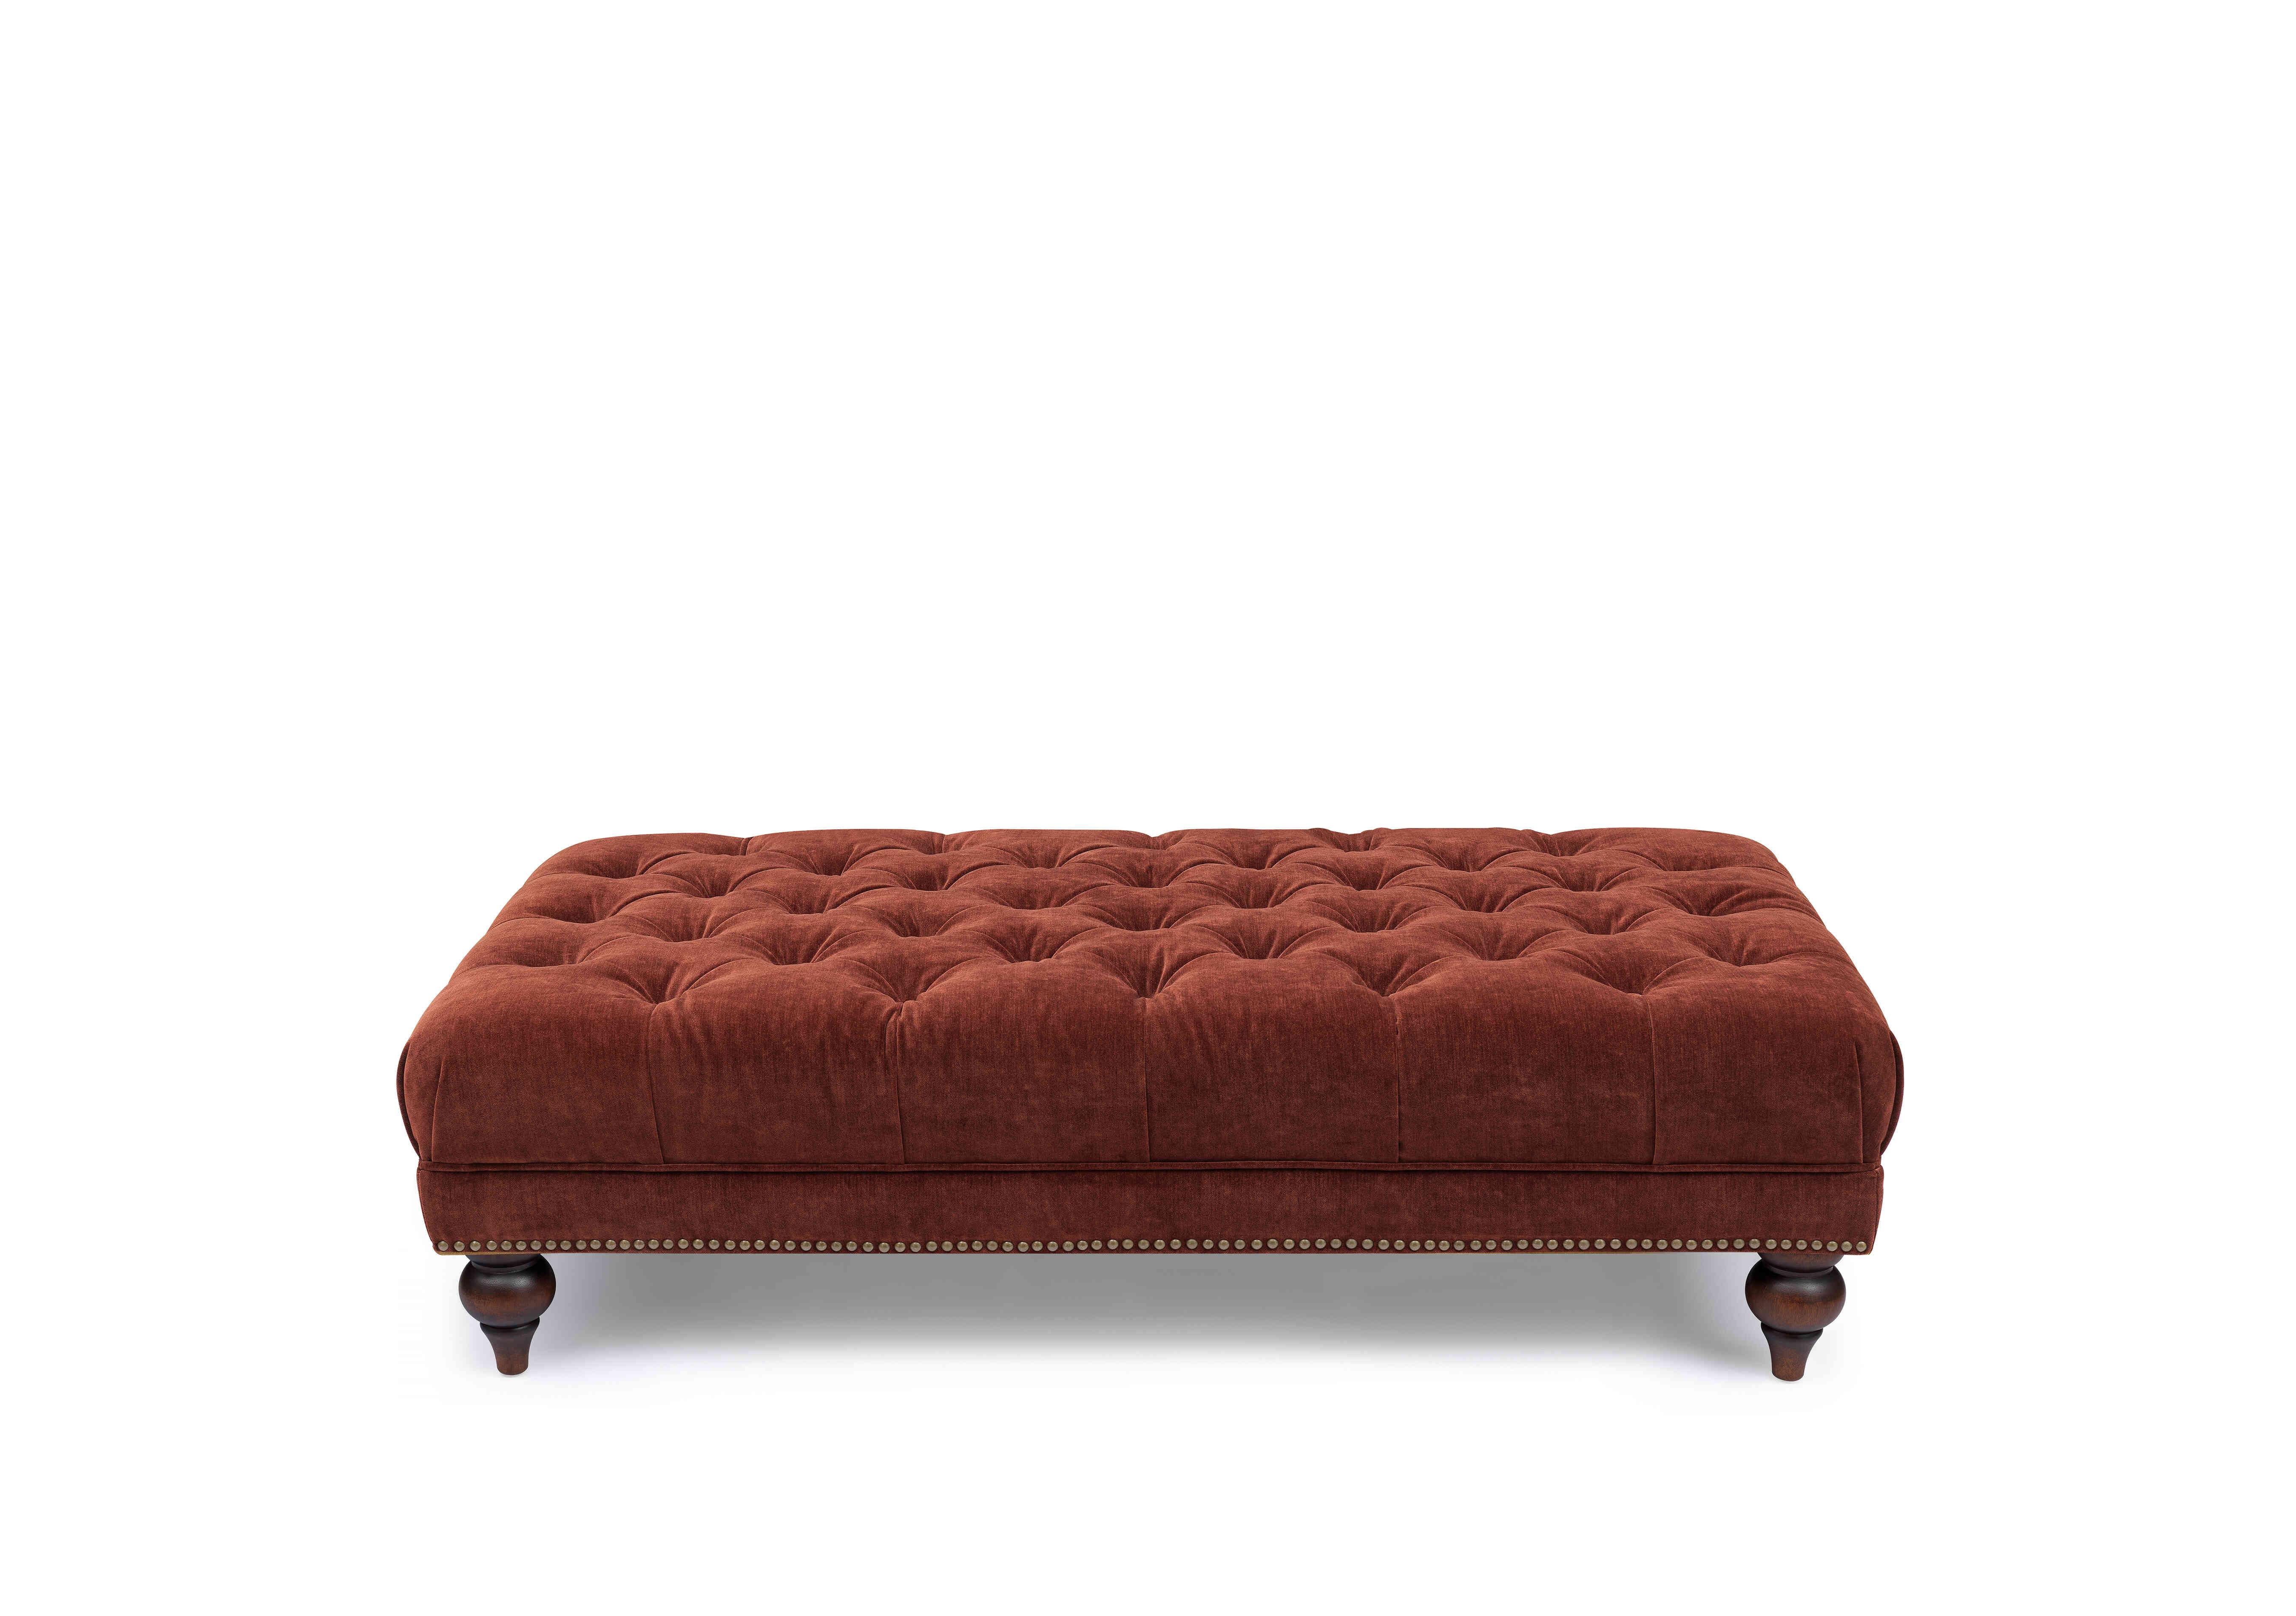 Wallace Fabric Rectangular Footstool with Turned Feet in X3y1-W019 Tawny on Furniture Village